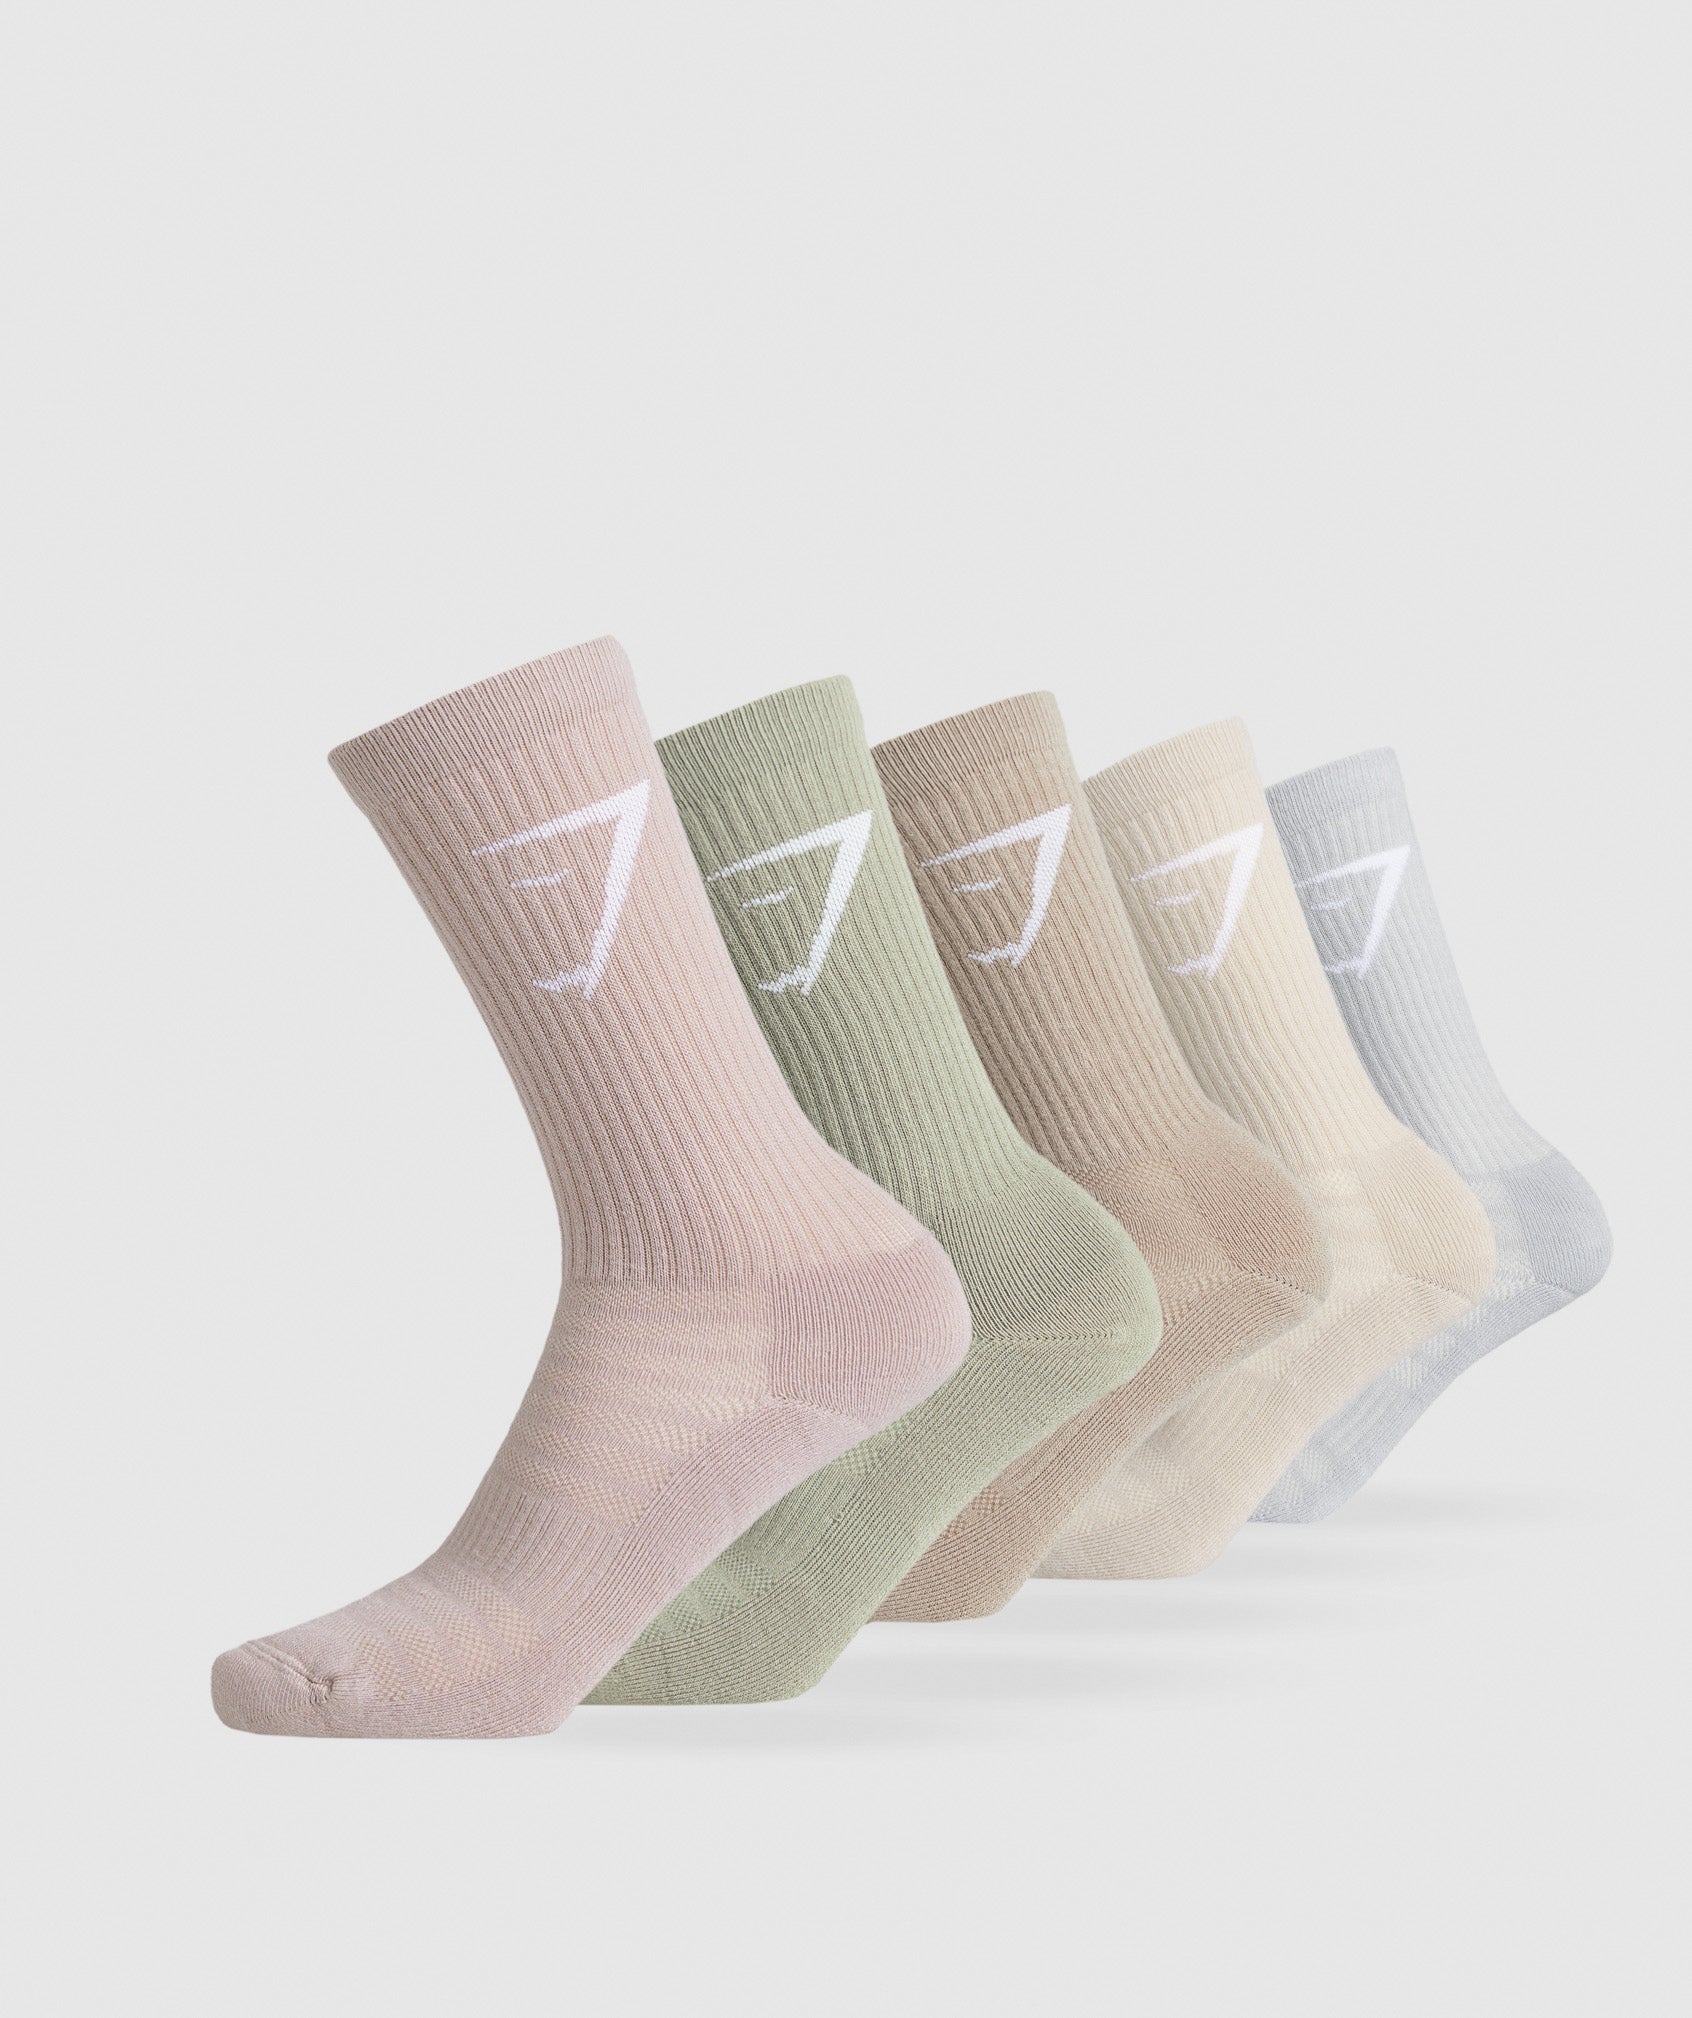 Crew Socks 5pk in Pink/Grey/Green/Grey/Brown is out of stock